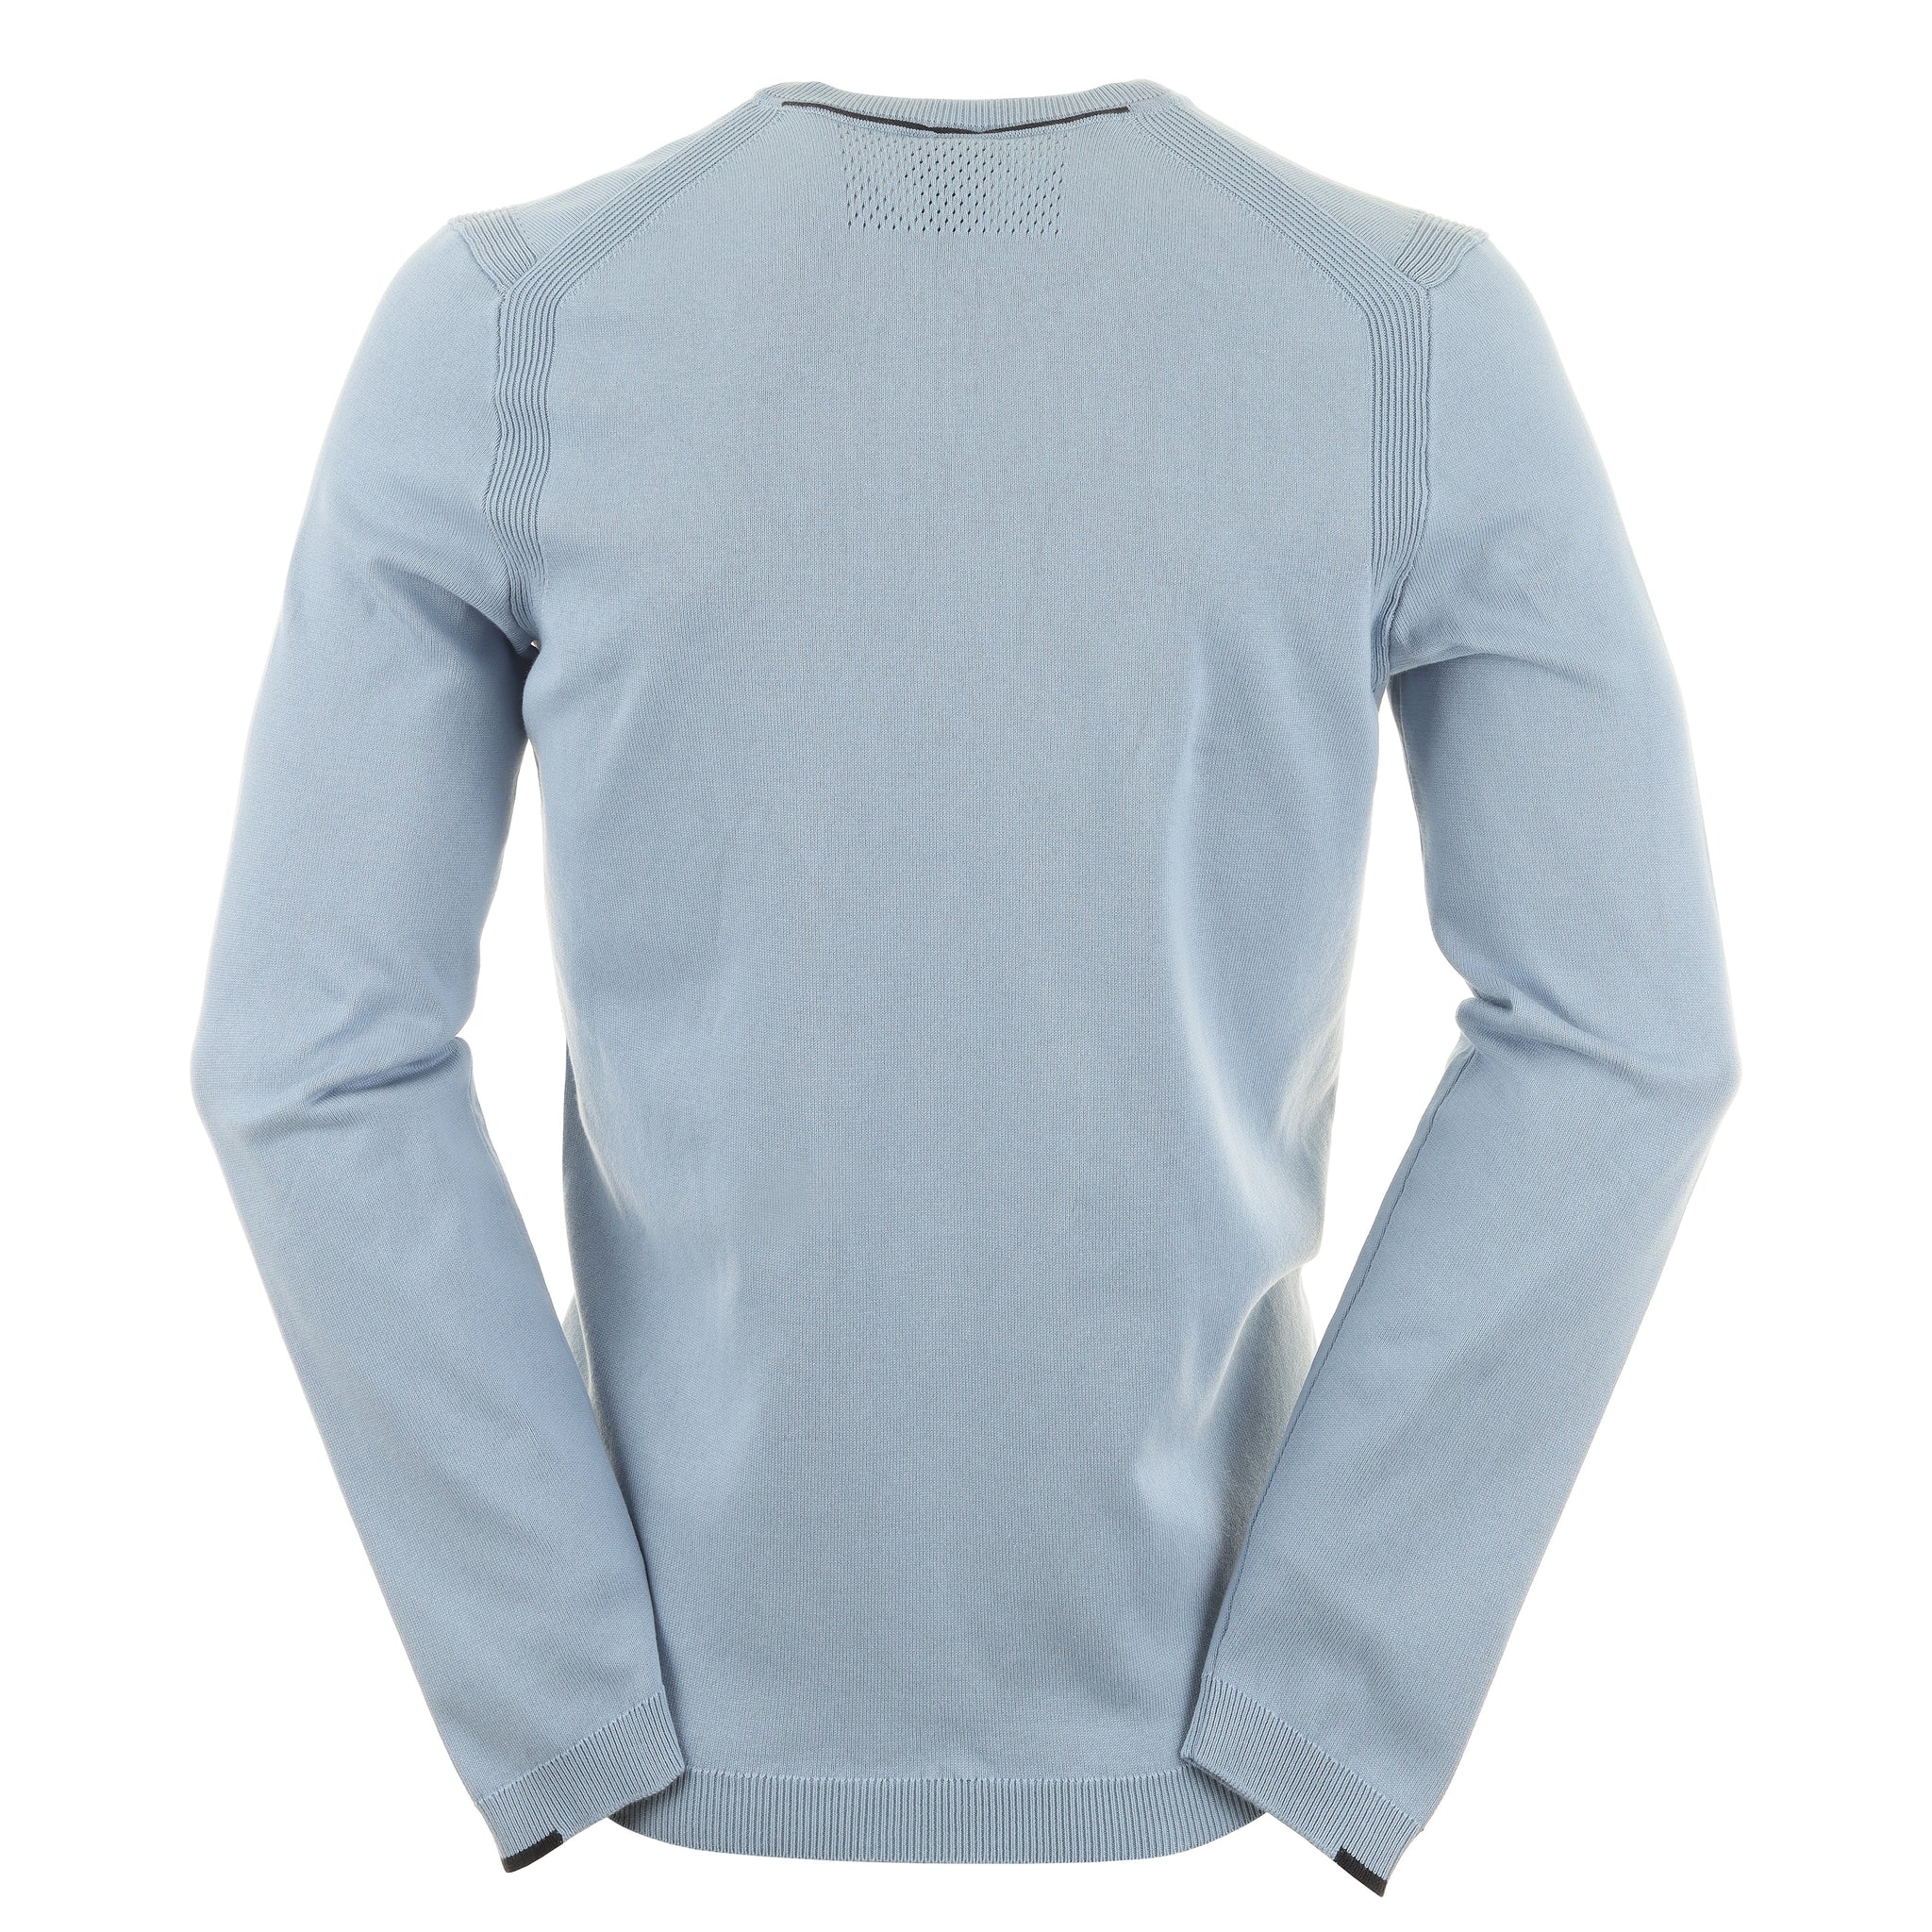 boss-ever-x-crew-neck-sweater-wi23-50498539-forever-blue-498-function18